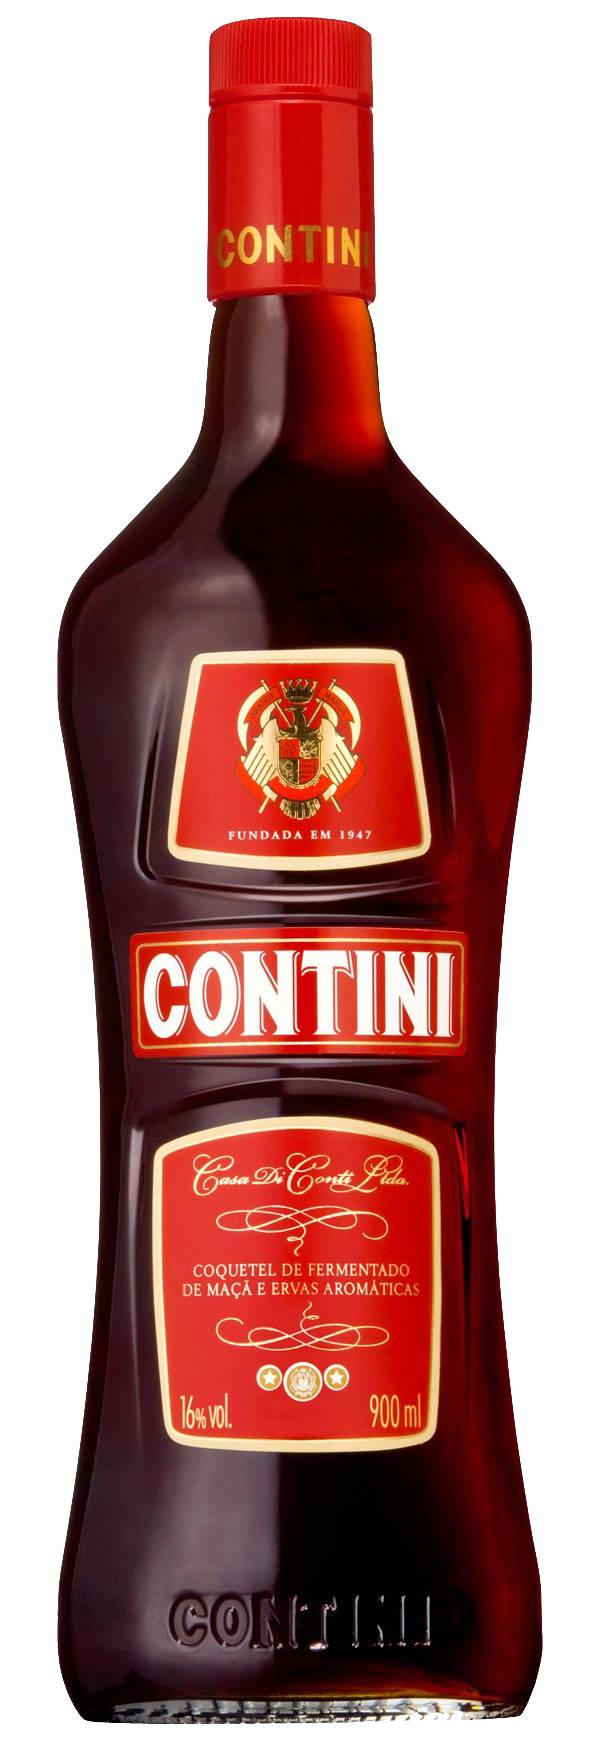 Contini vermouth tinto doce rosso (900 mL)